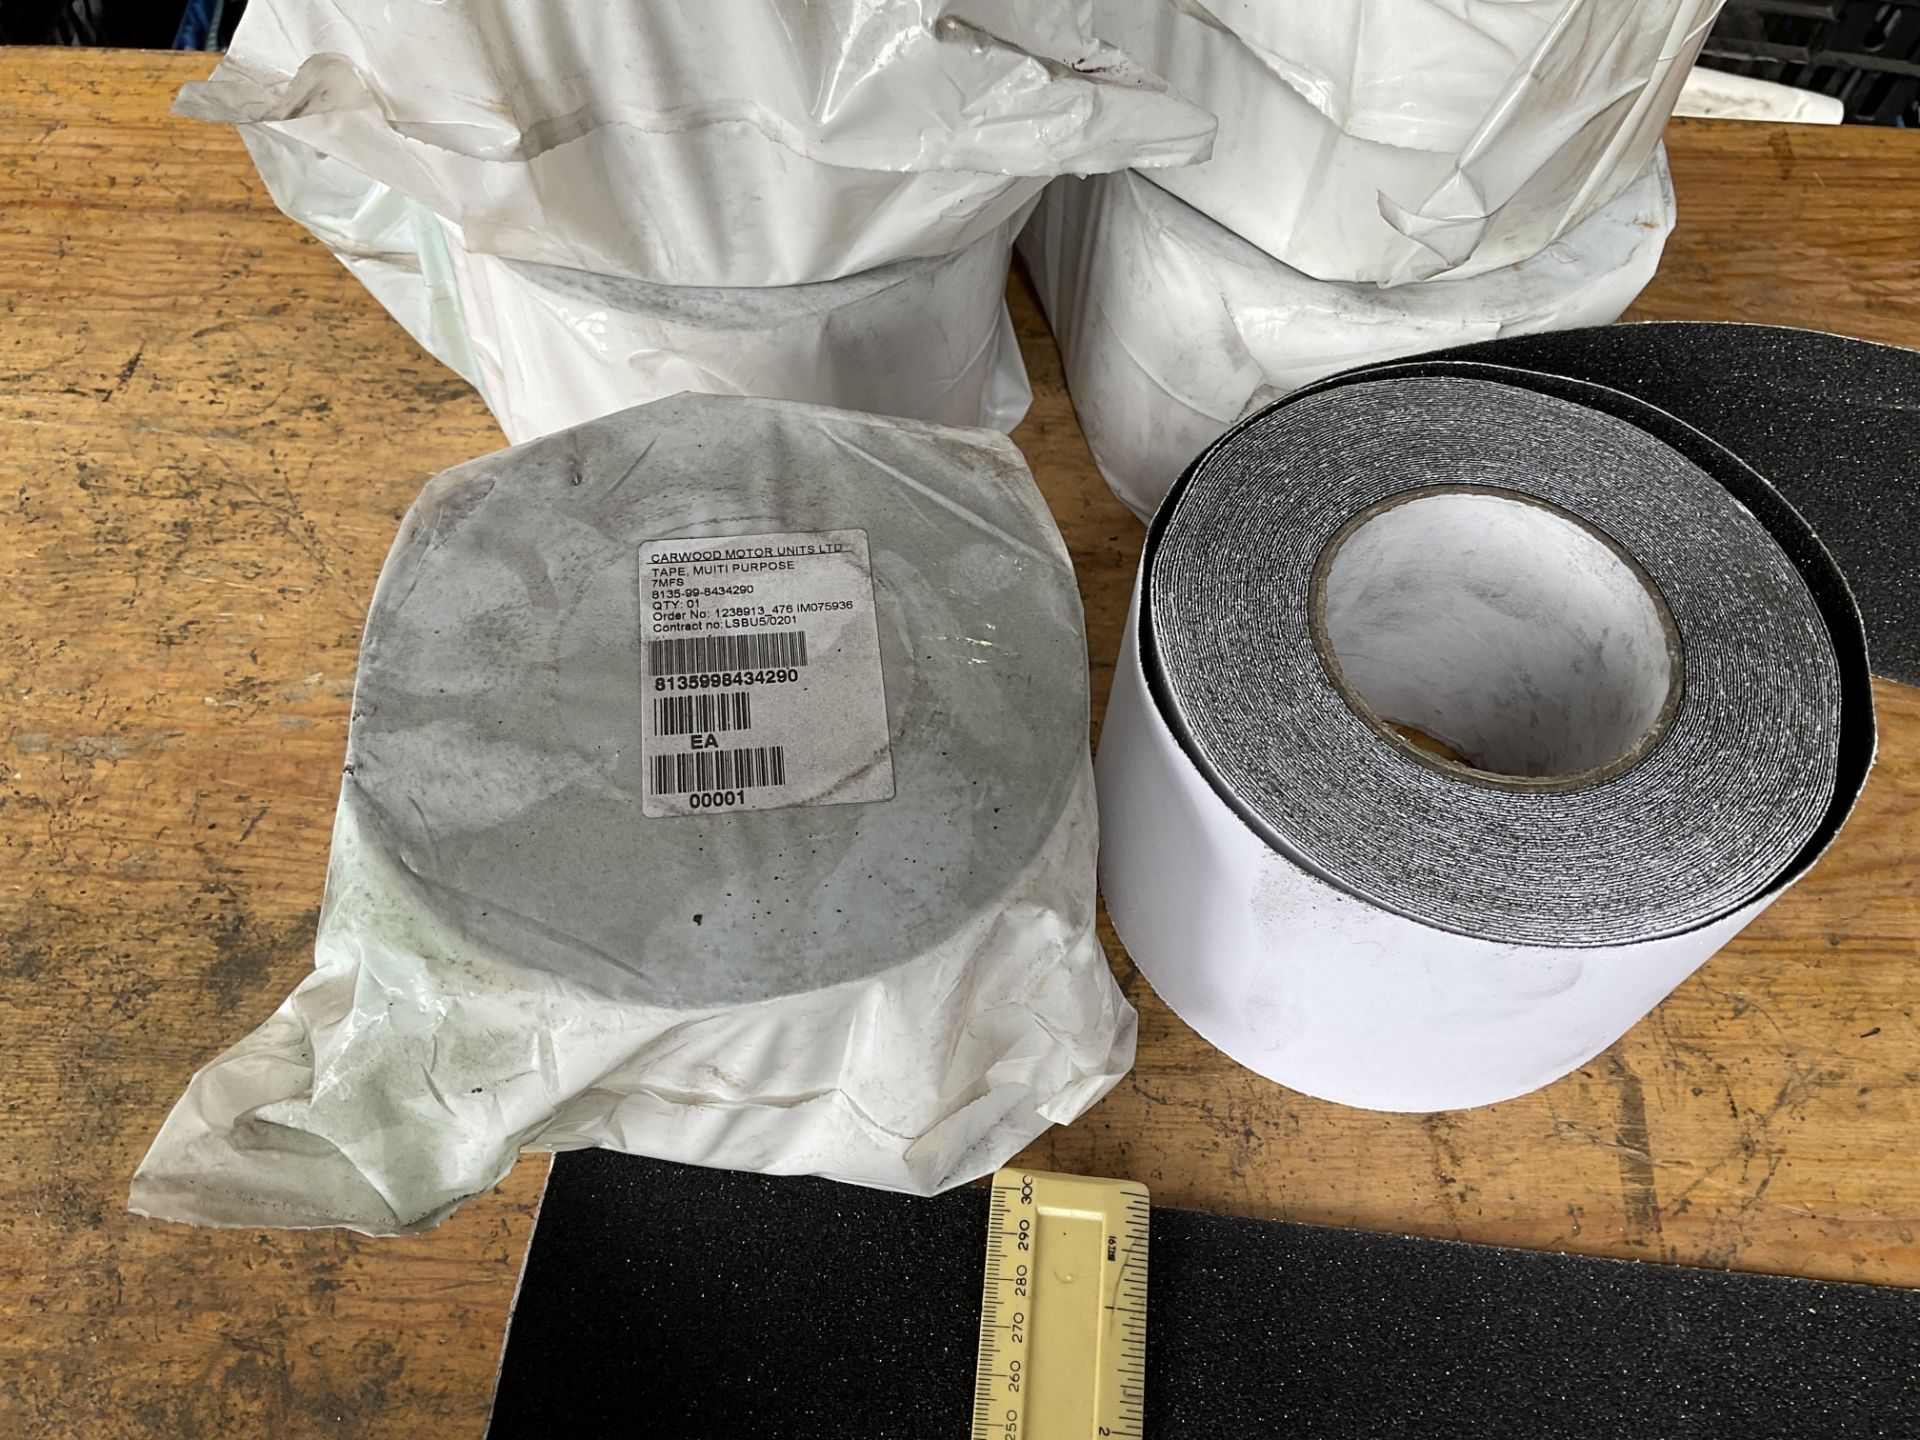 6X ROLLS OF NON SLIP WALKWAY TAPE 3.5 ins WIDE. NOS - Image 3 of 3